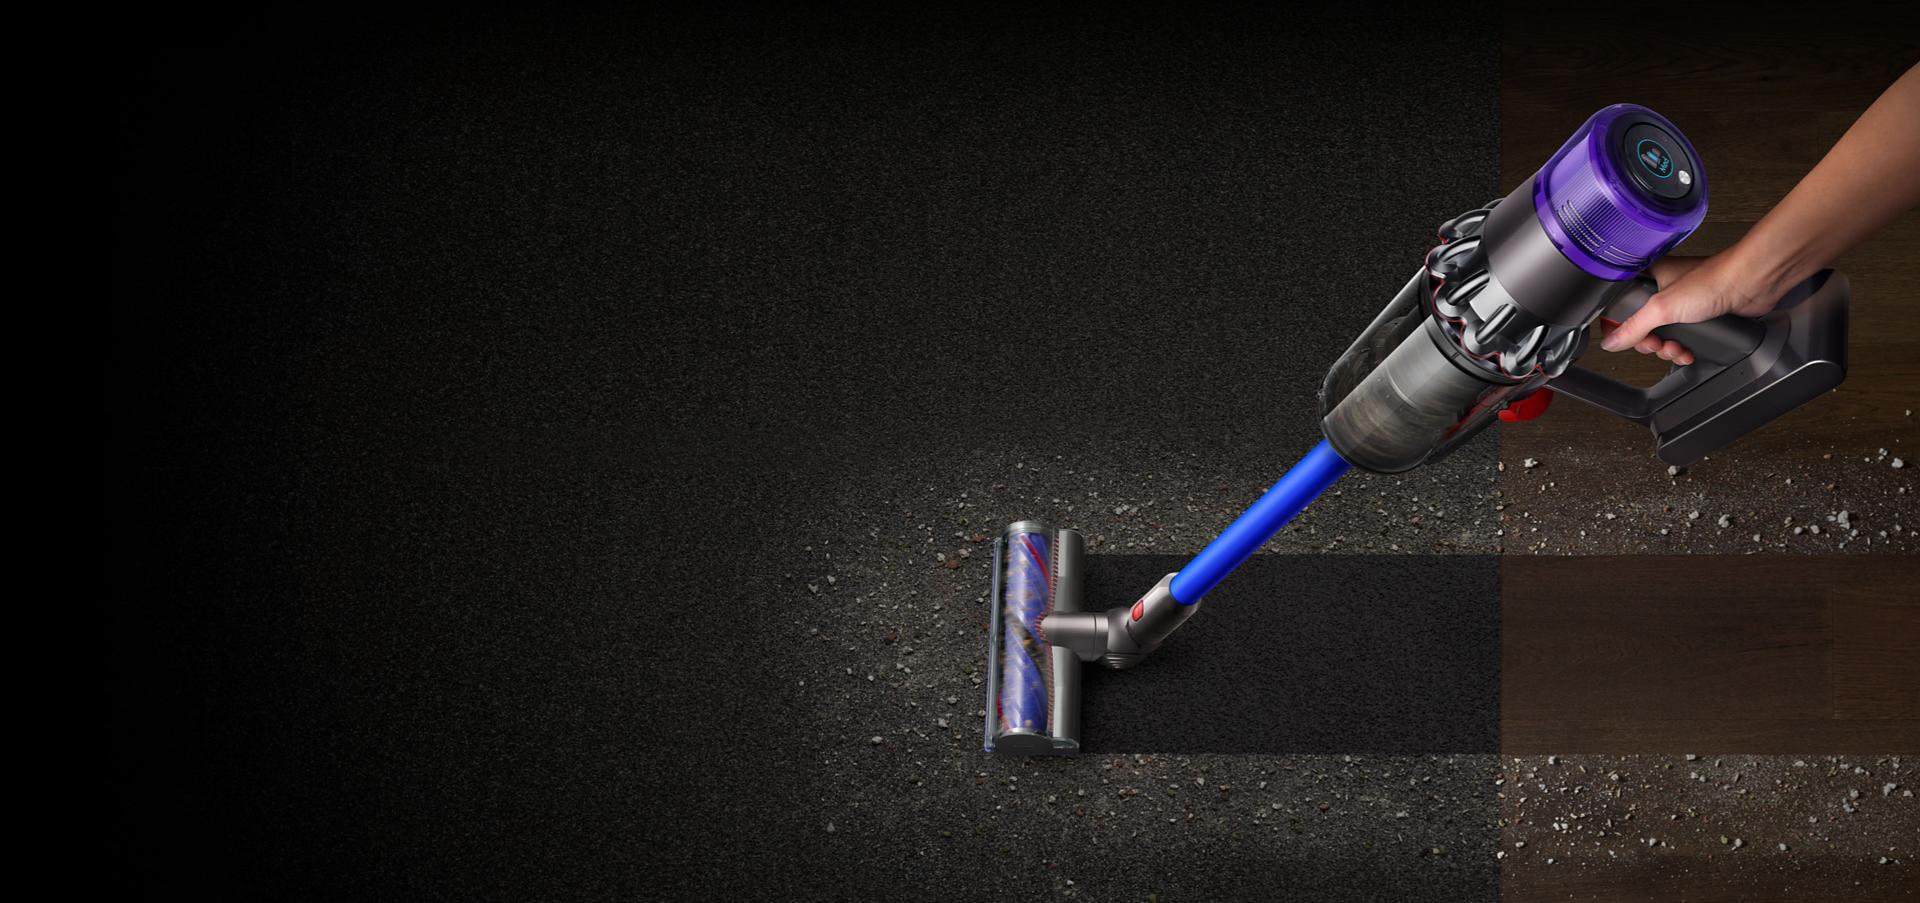 A Dyson V11™ vacuum picking up fine dust, allergens and pollen from the floor.